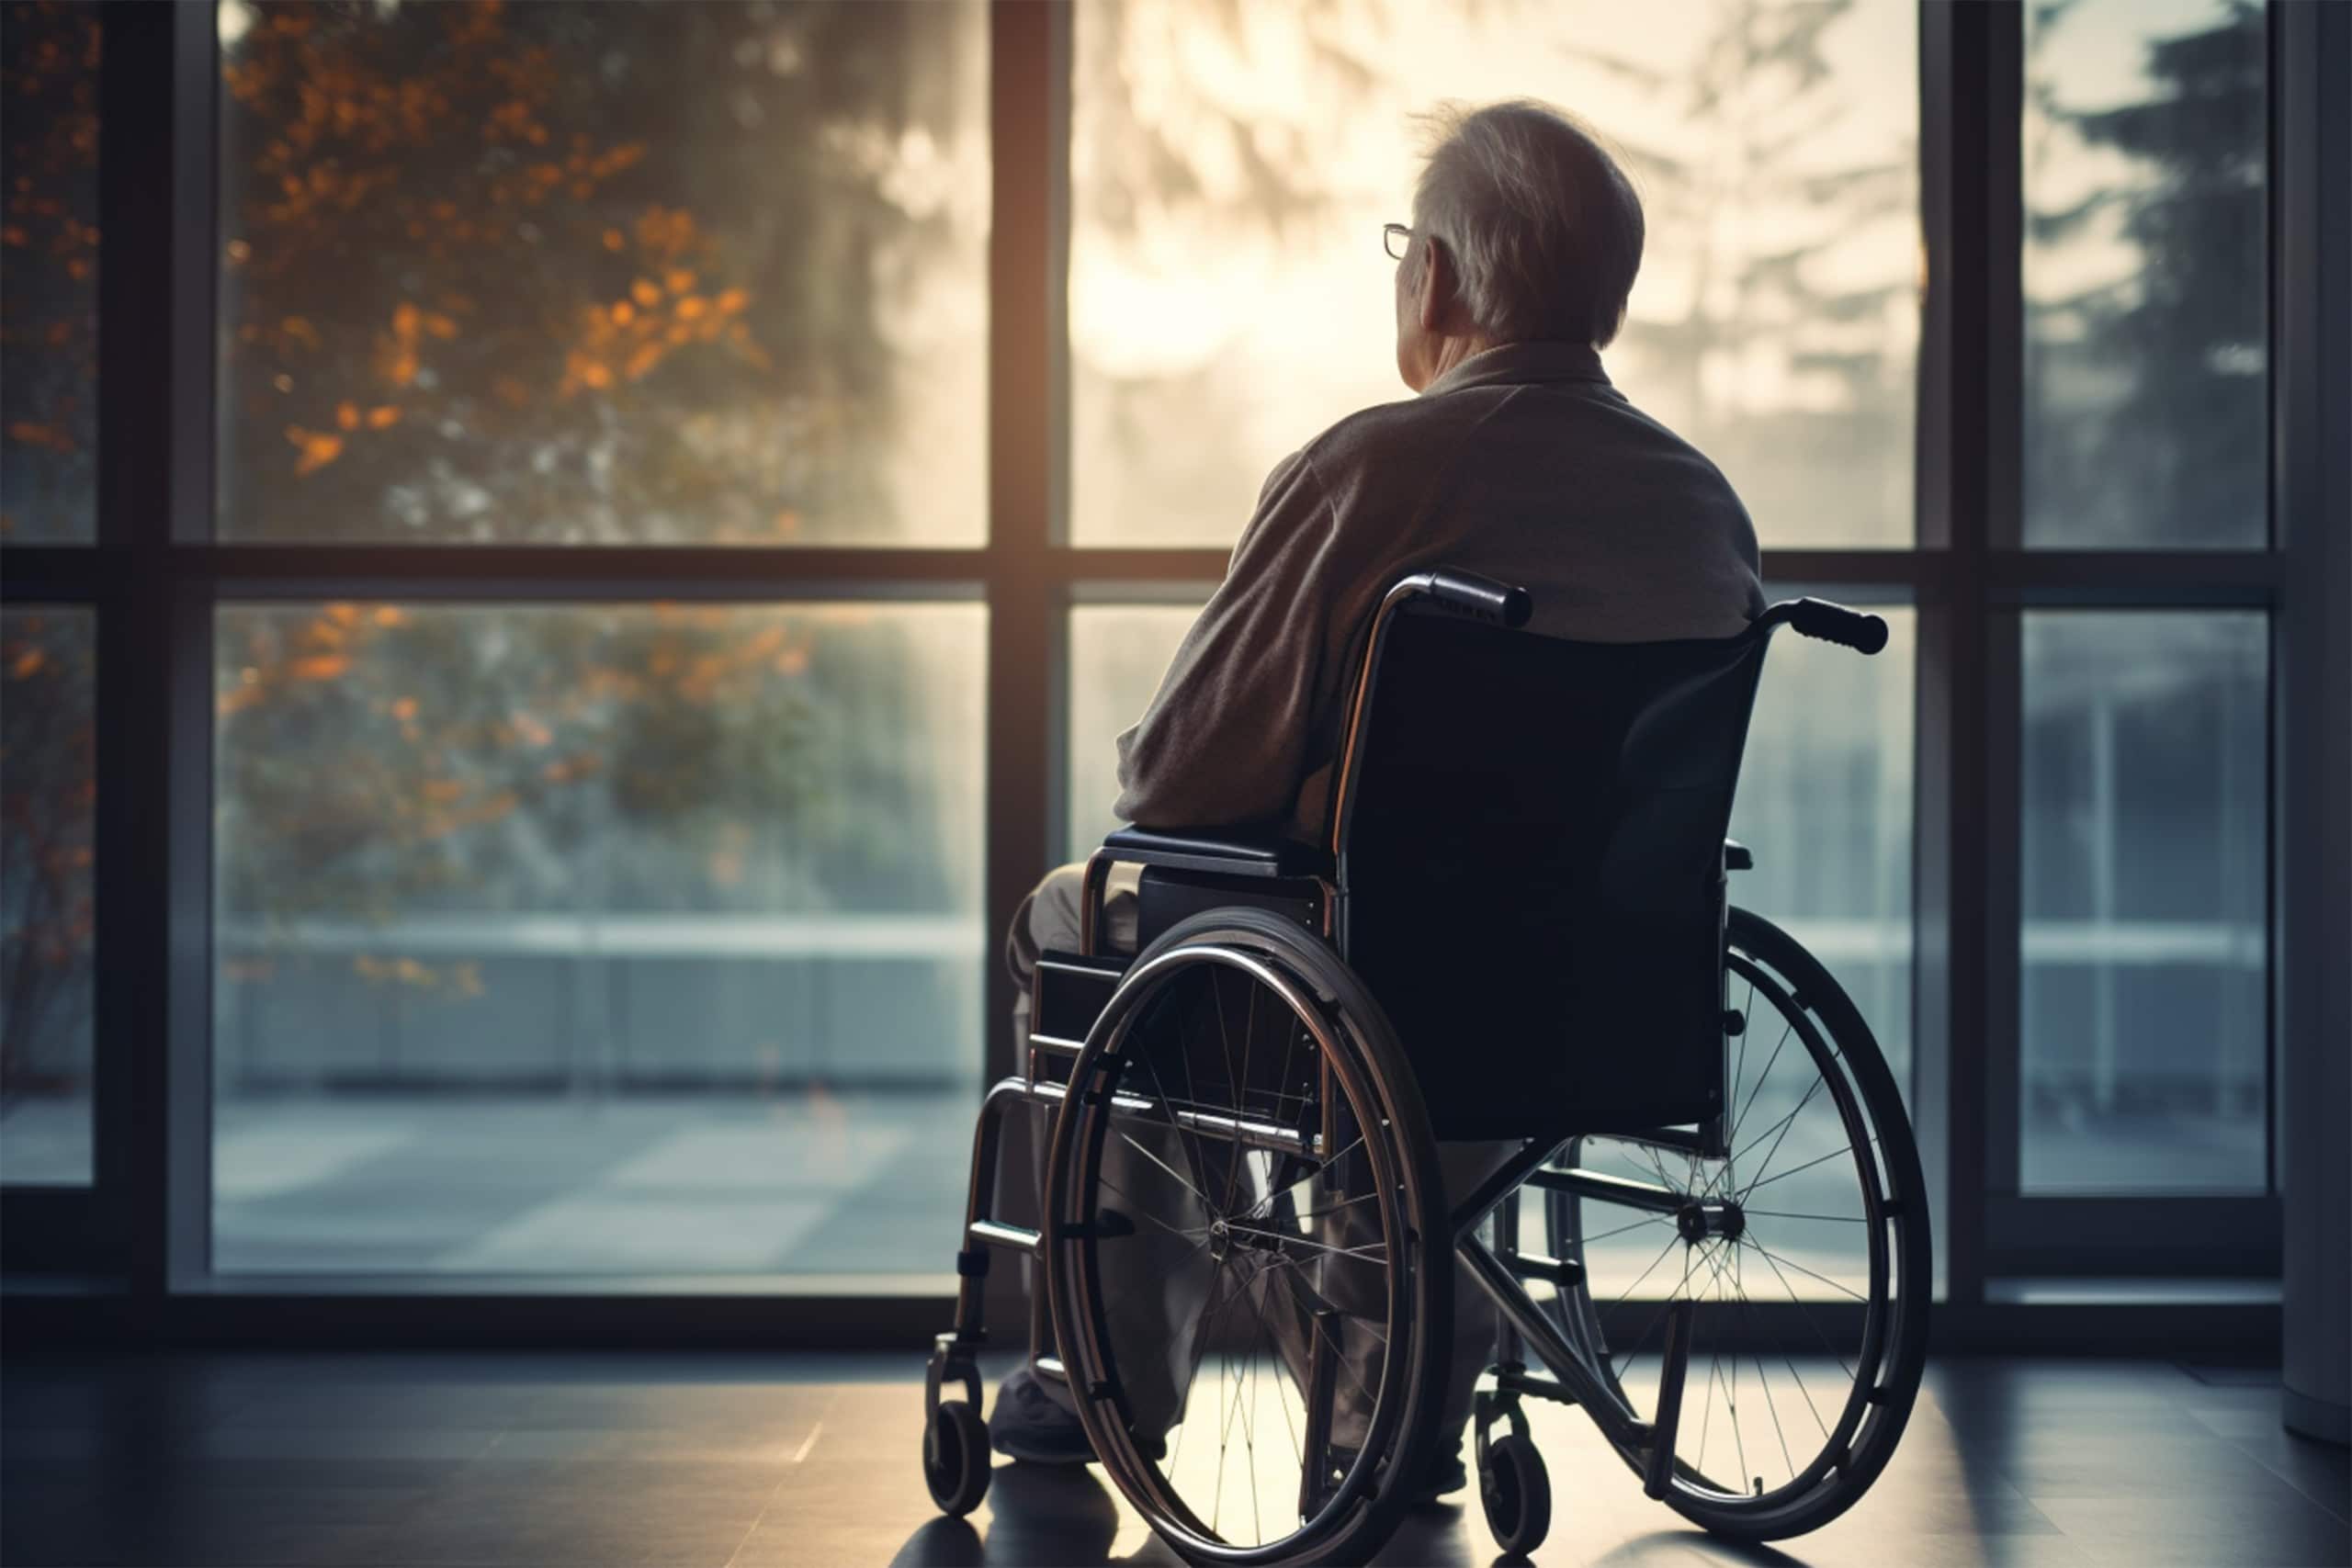 Older man sitting in wheelchair facing out window at sunrise.